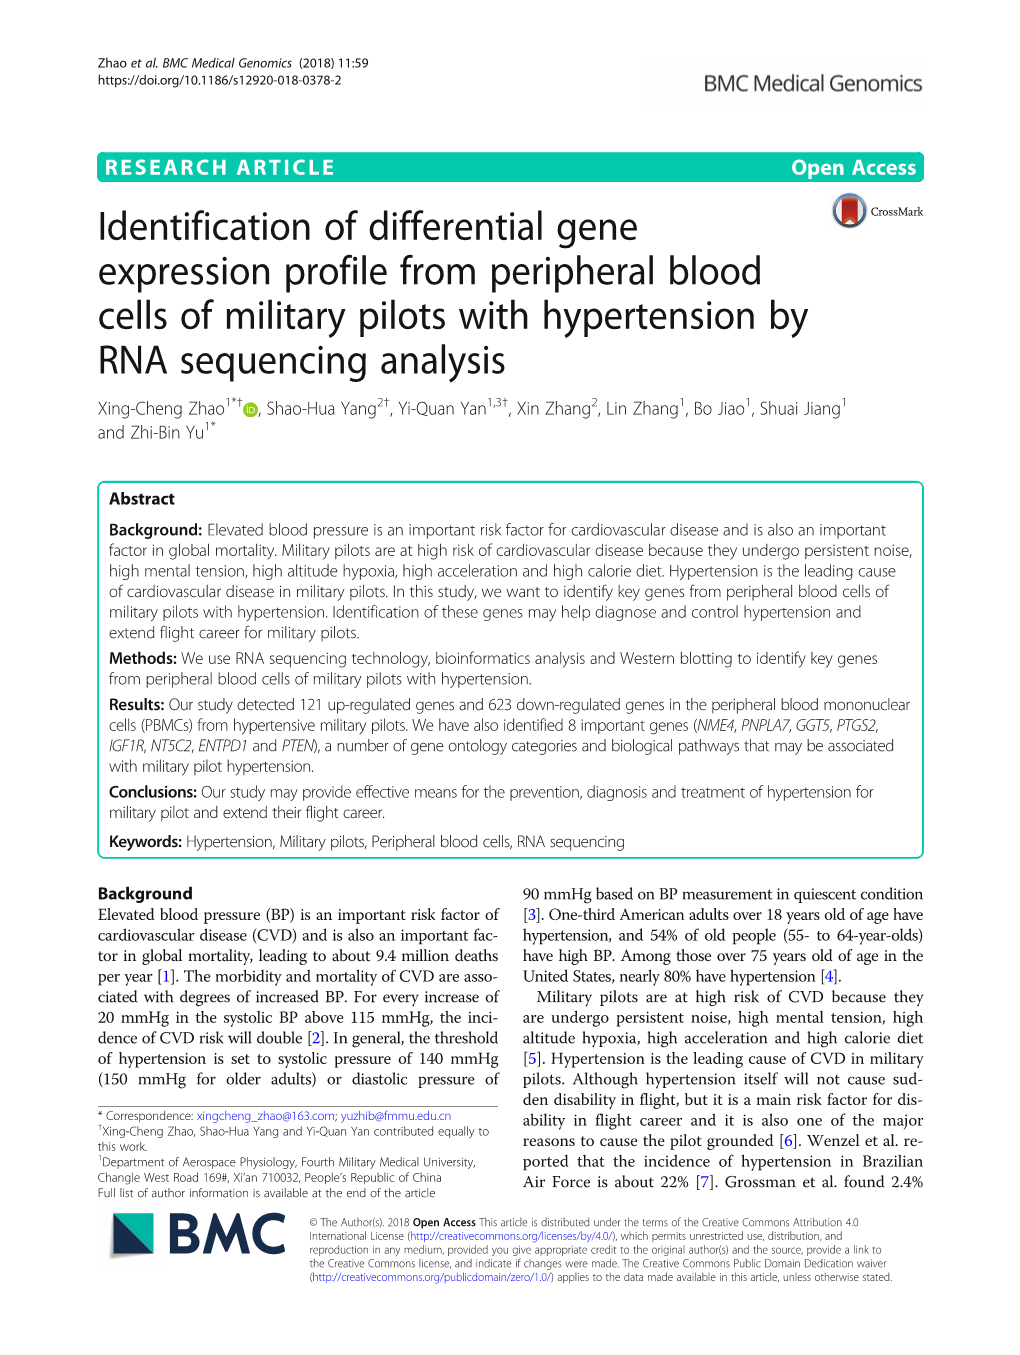 Identification of Differential Gene Expression Profile from Peripheral